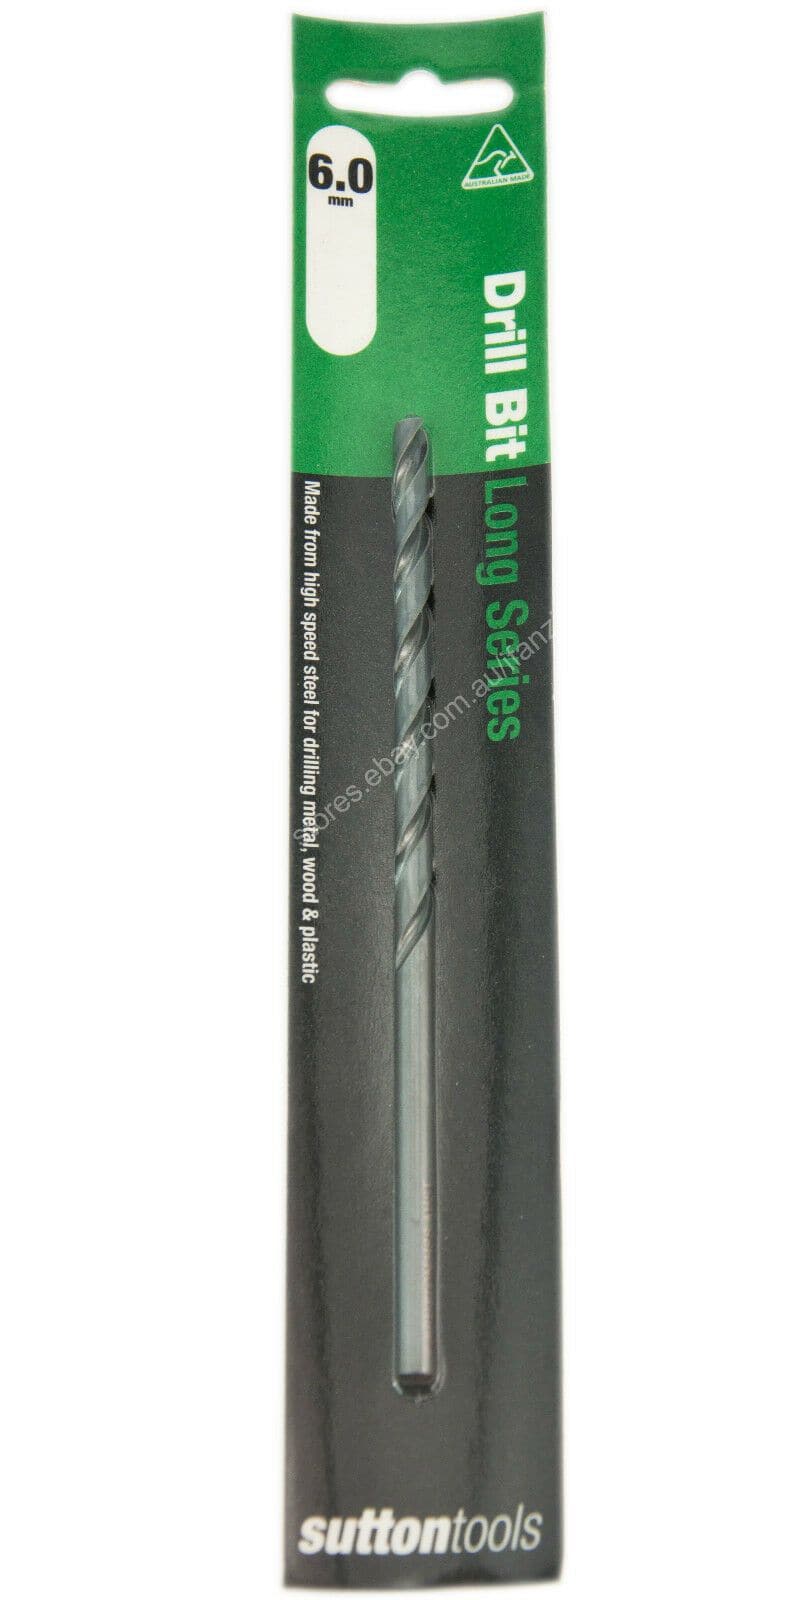 suttontools Metric HSS Long Series Drill Bits For Metal, Wood, Plastic 6mm - Double Bay Hardware